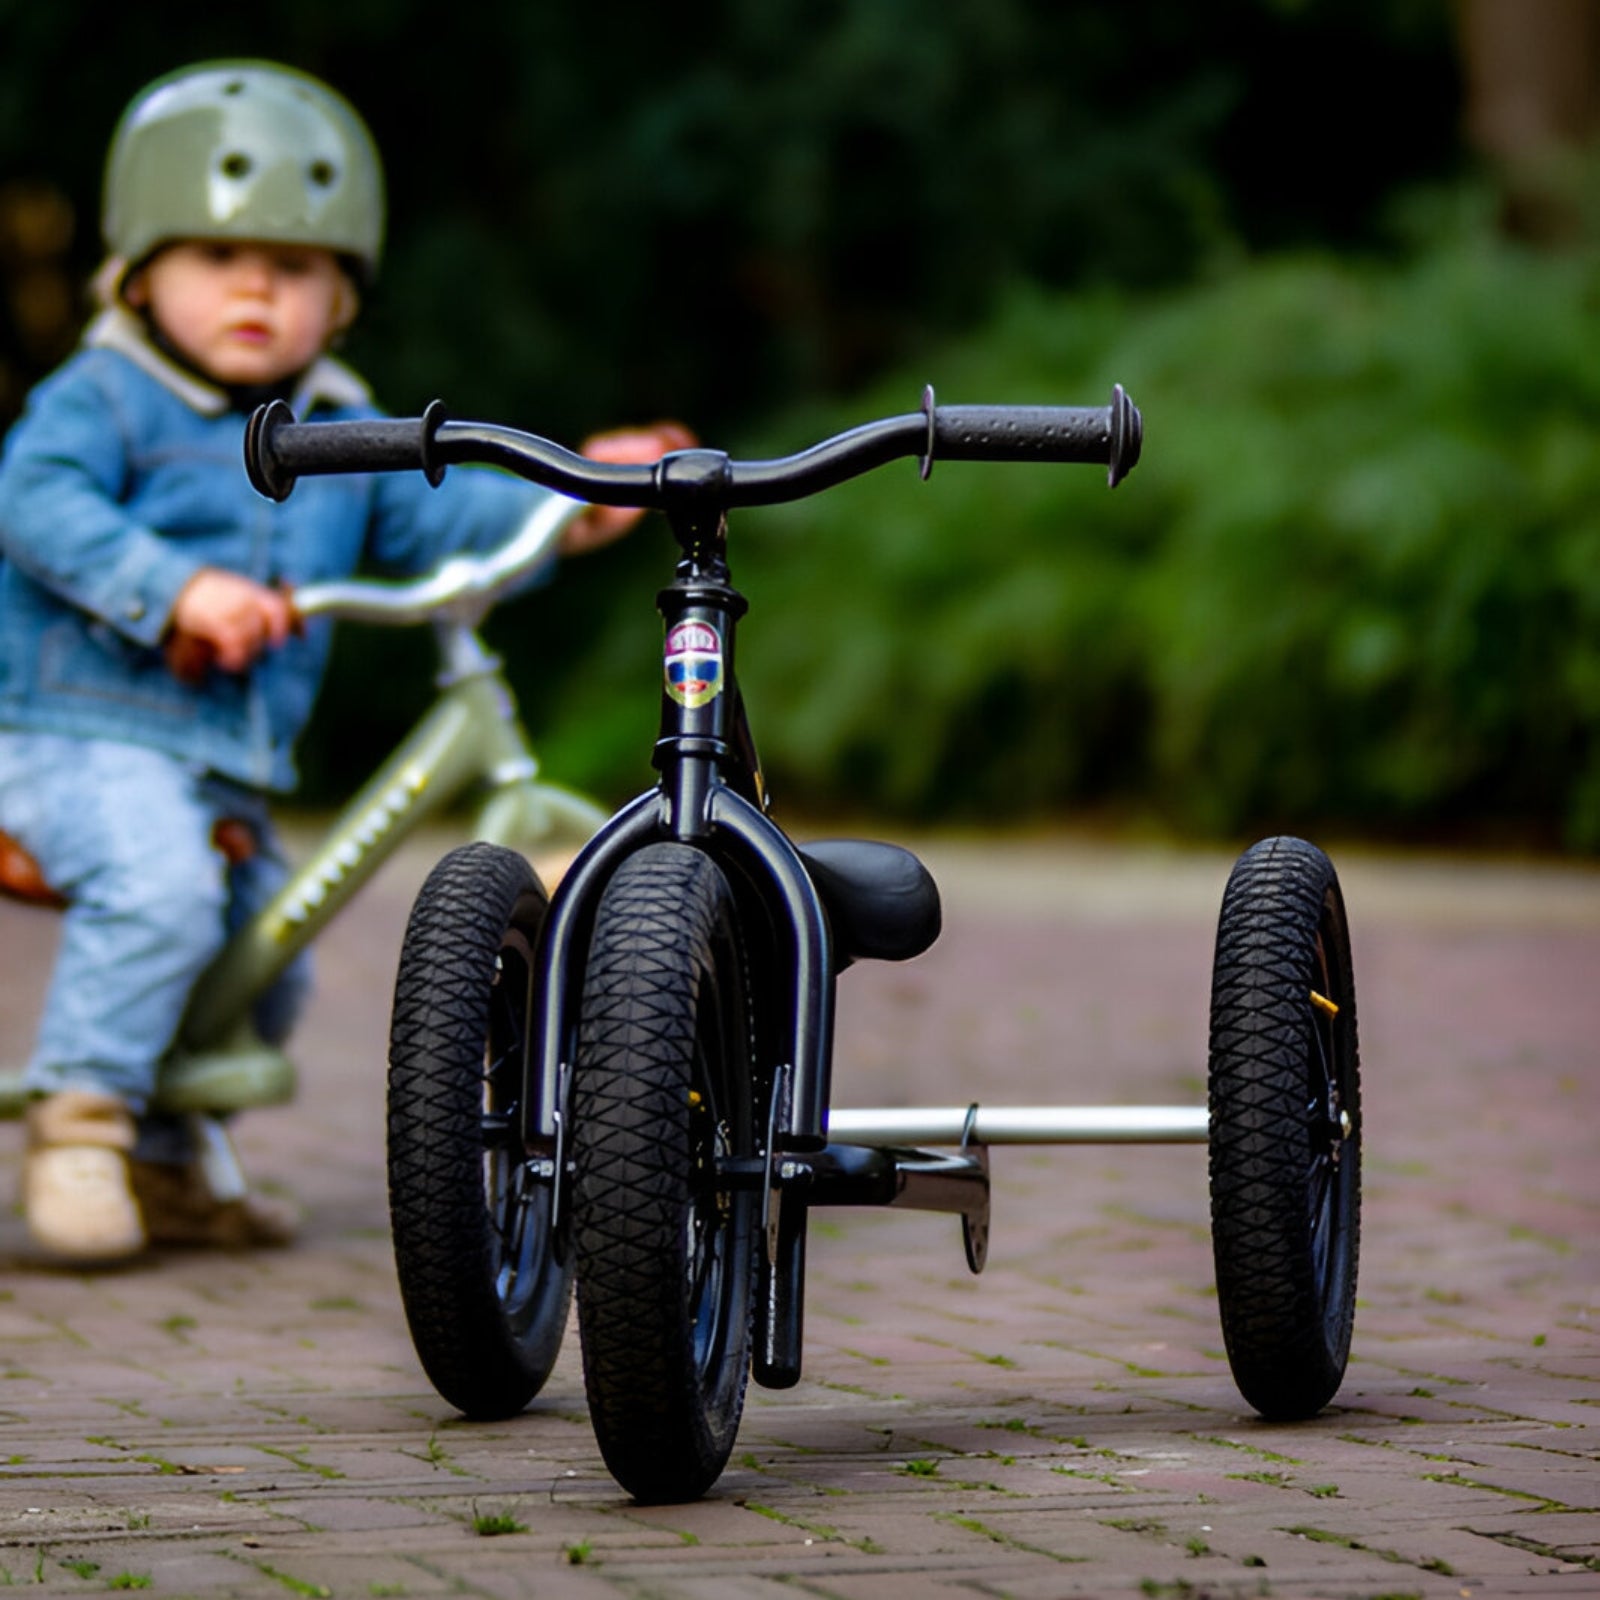 Urban adventure awaits with the Trybike Black for kids.